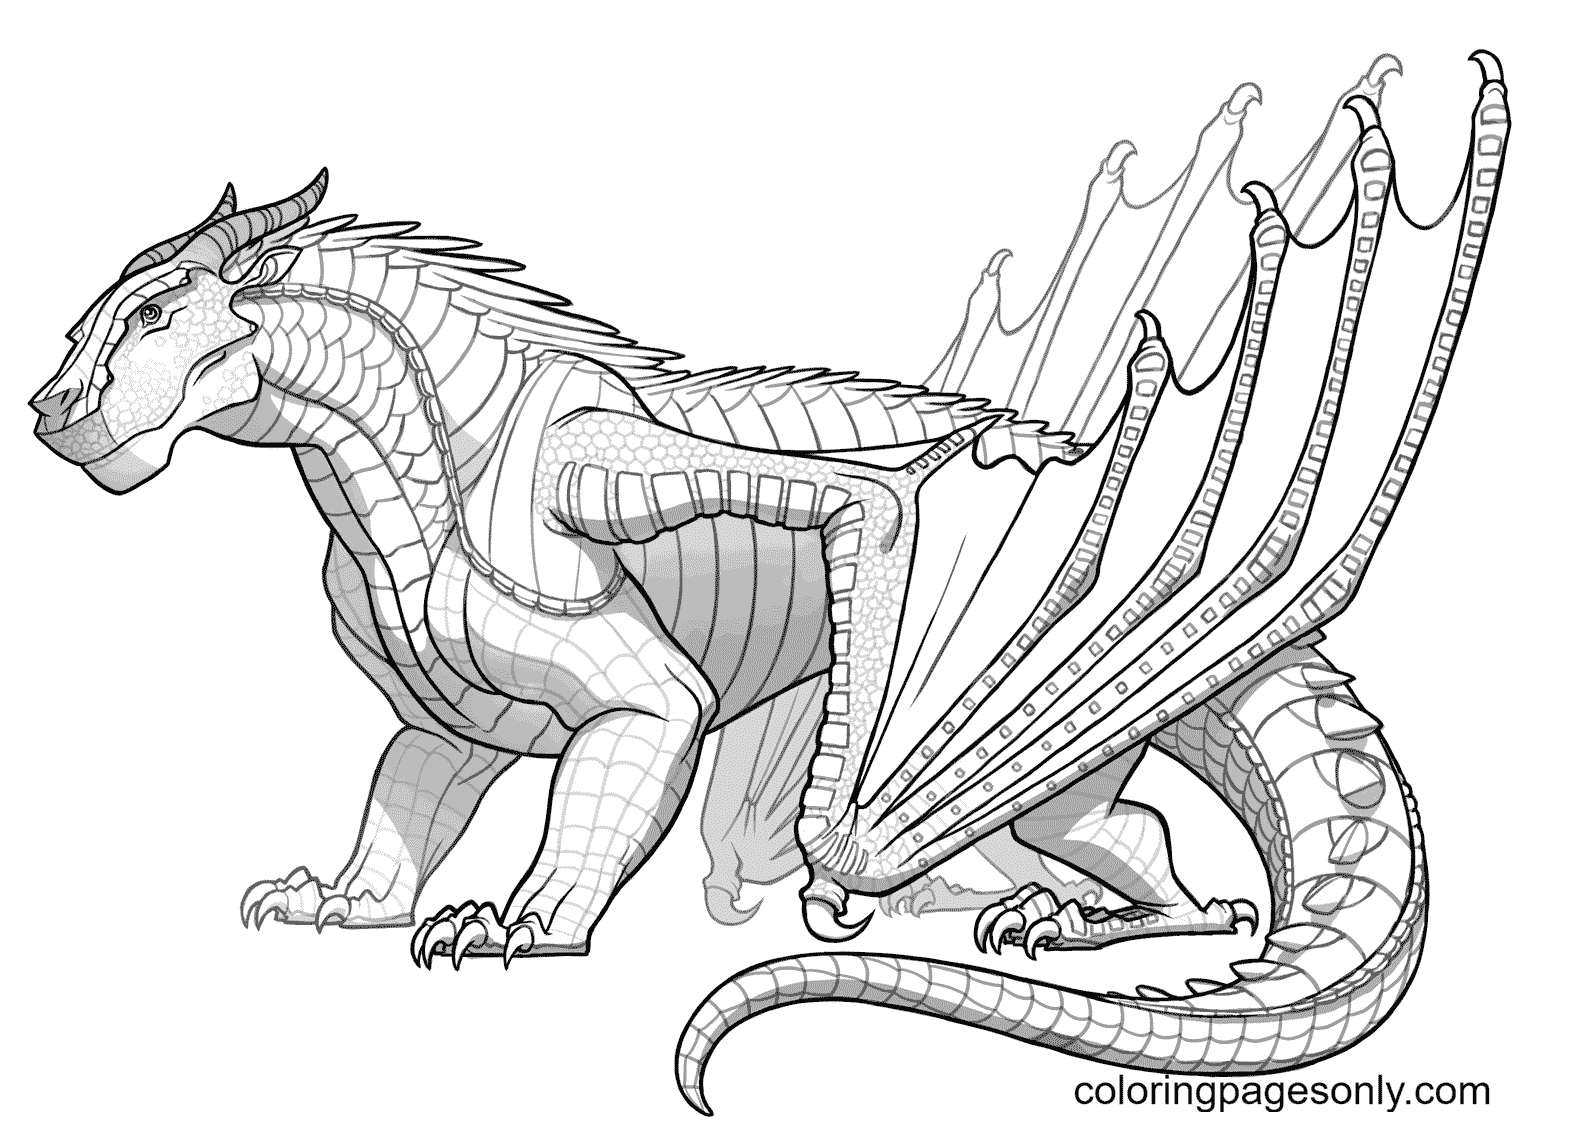 Mudwing Dragon from Wings of Fire Coloring Pages   Wings Of Fire ...